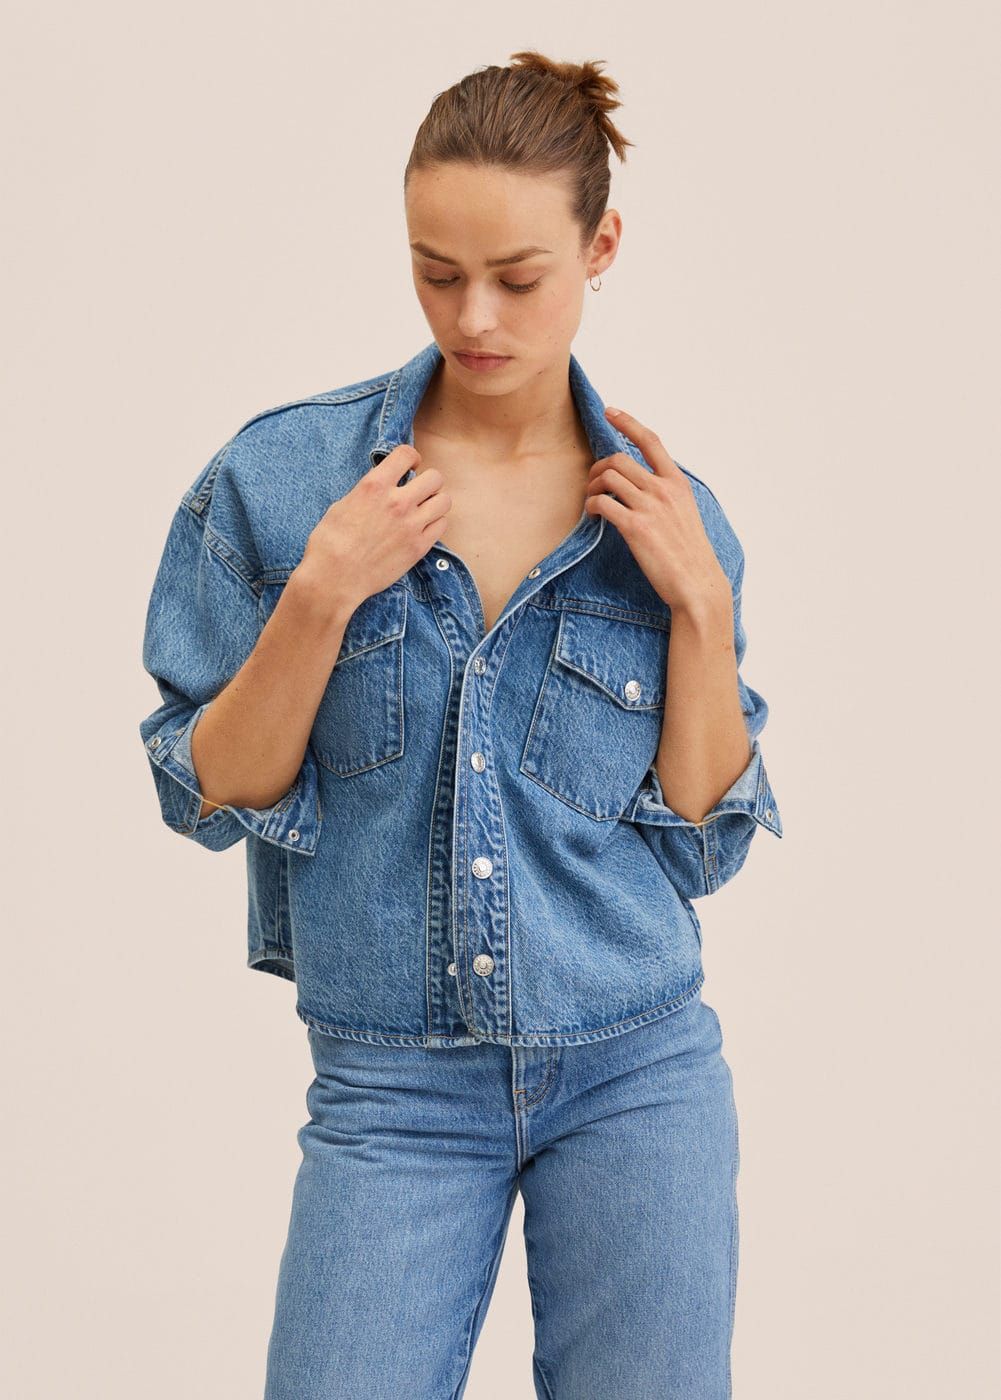 10 Denim Shirt Outfits That Are Casual and Cool | Who What Wear